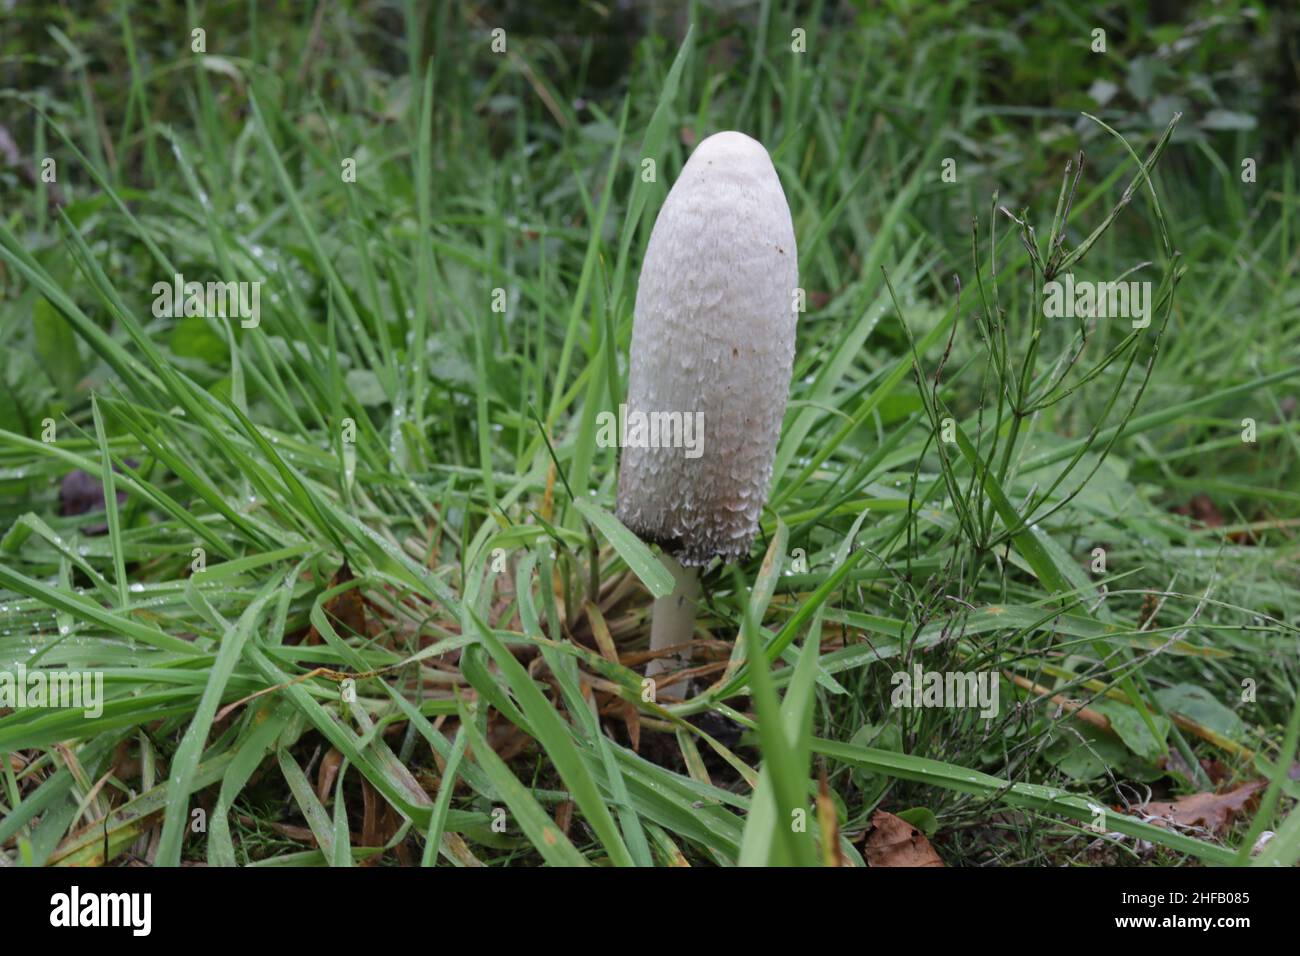 Coprinus comatus, shaggy ink cap or lawyer's wig found in the Cairngorms national Park in Scotland. Stock Photo